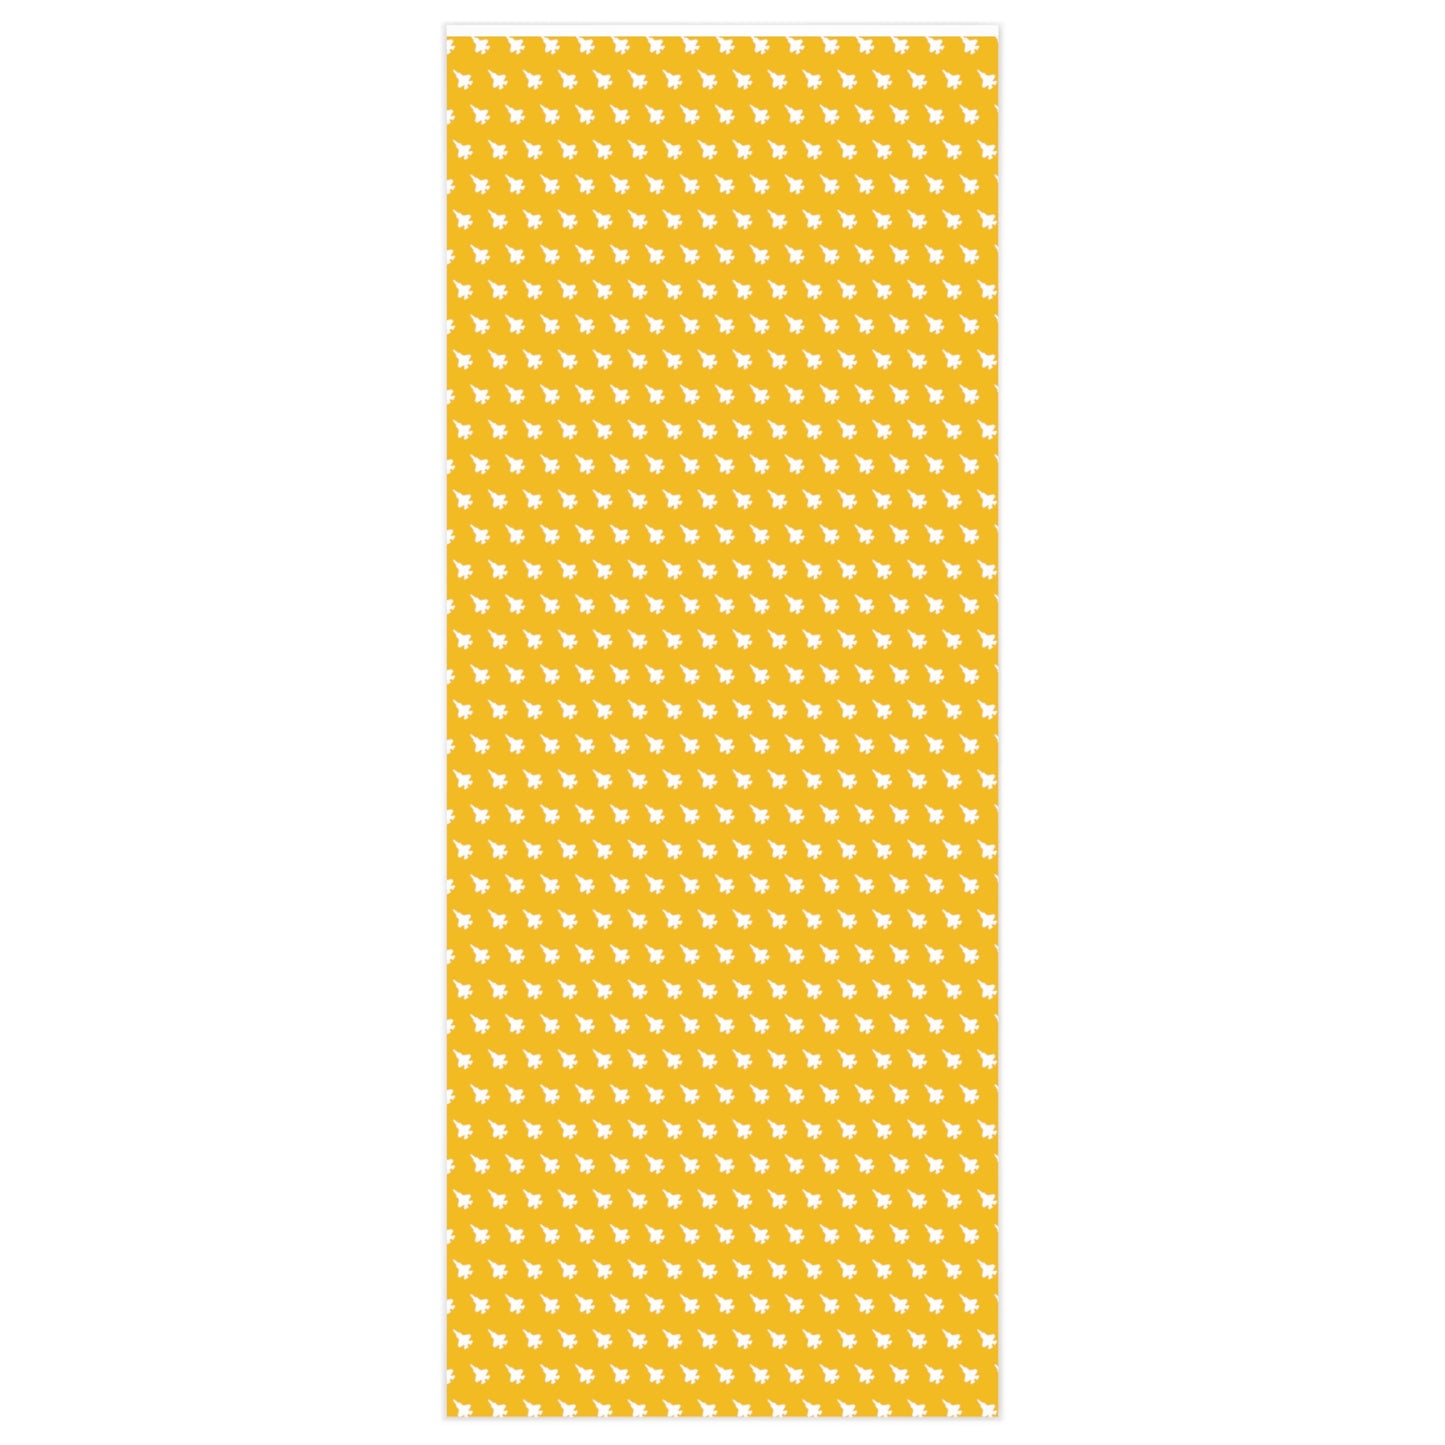 F-35 Wrapping Paper, Yellow